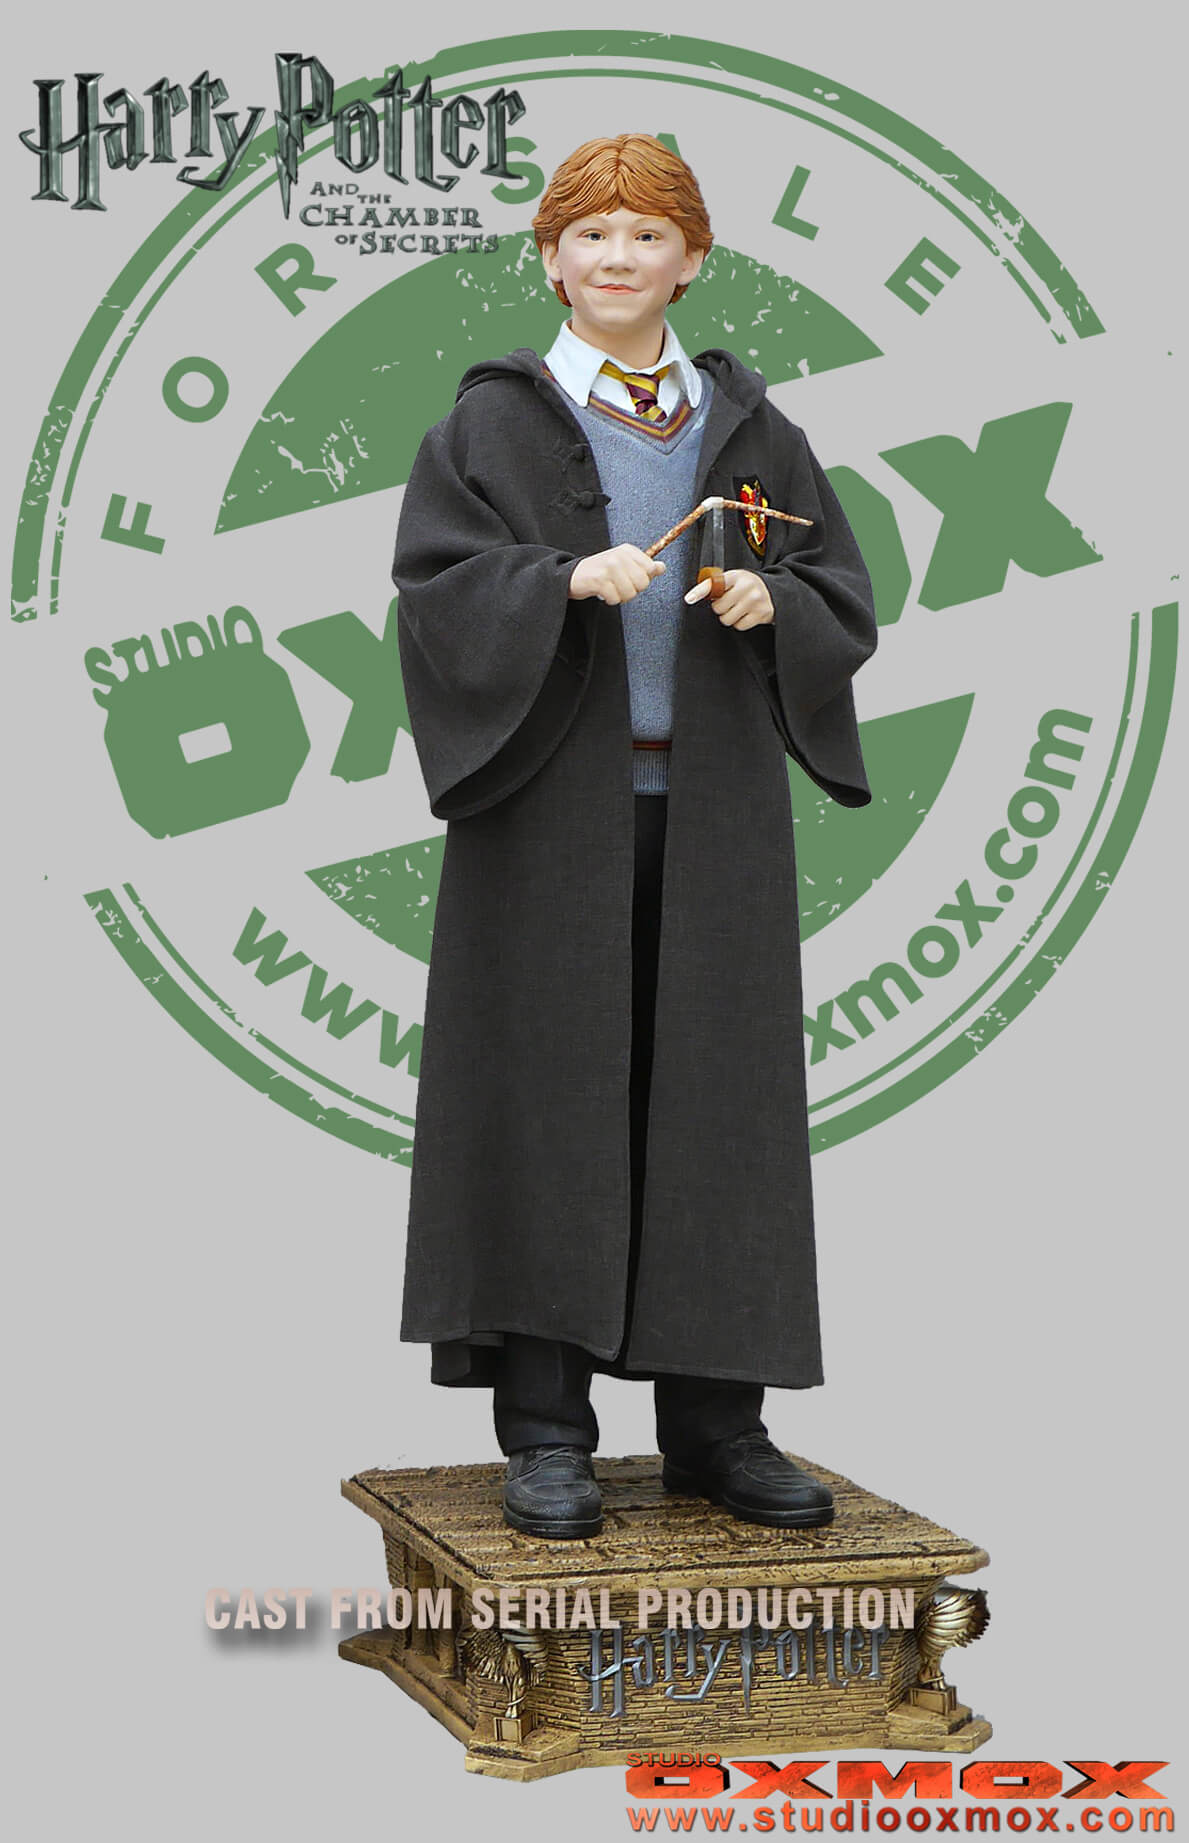 Ron, Harry Potter, Chamber of Secrets, life size statue